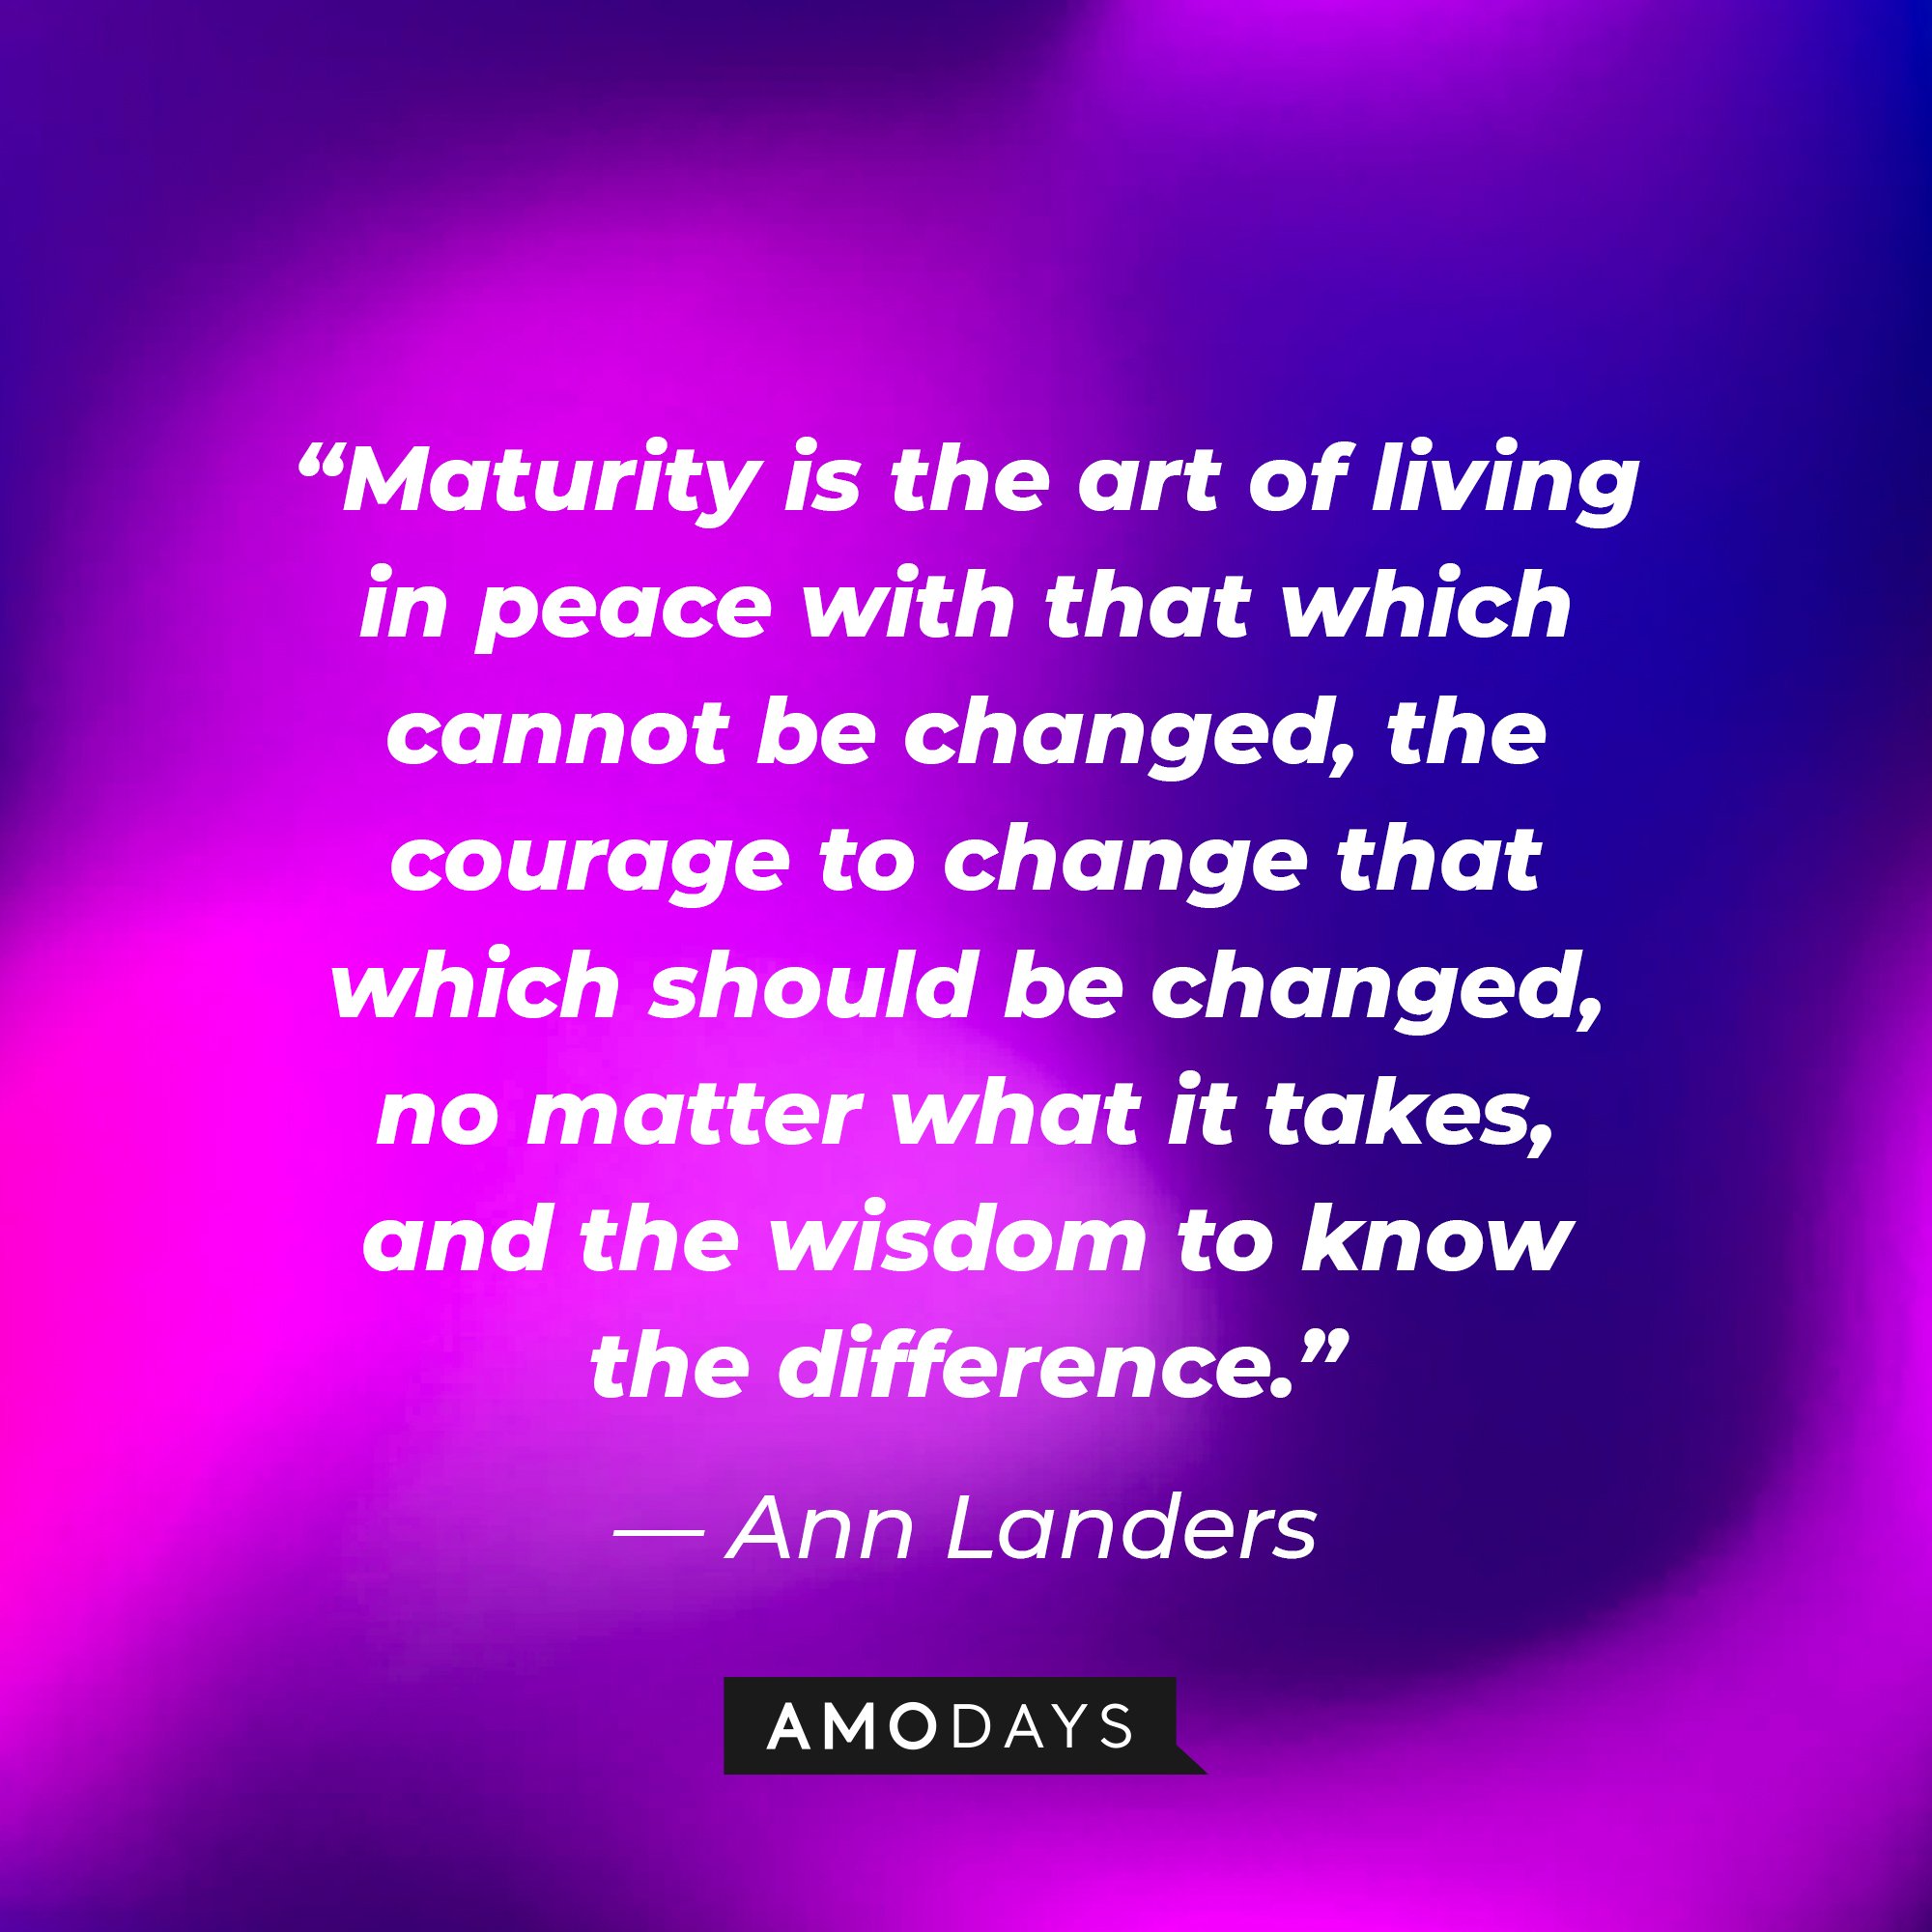  Ann Landers's quote: “Maturity is the art of living in peace with that which cannot be changed, the courage to change that which should be changed, no matter what it takes, and the wisdom to know the difference.” | Image: AmoDays